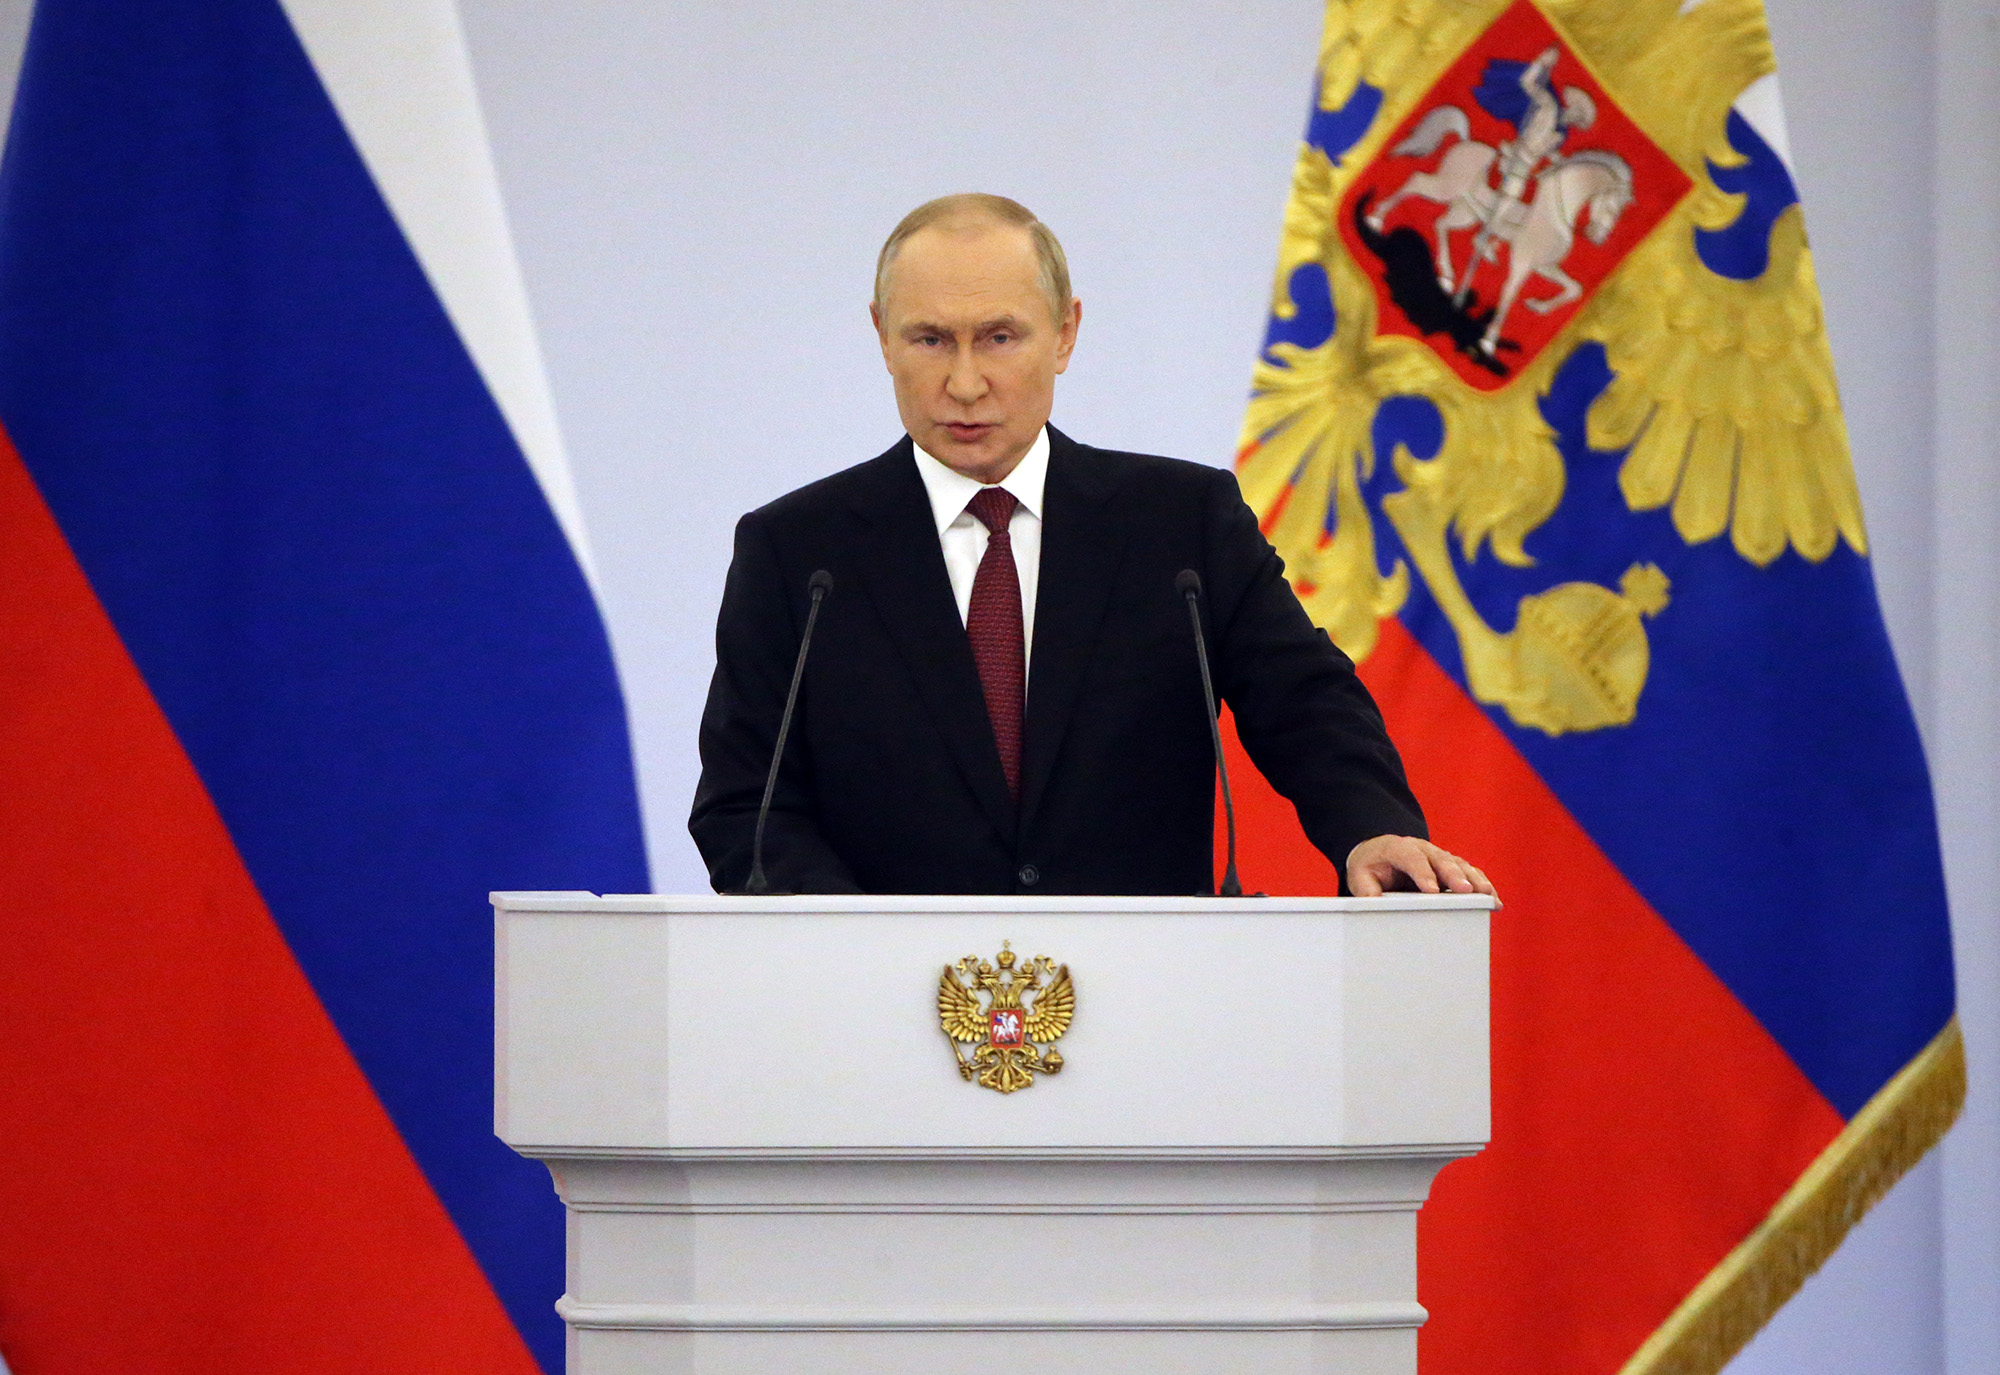 Russian President Vladimir Putin speaks during the signing ceremony with separatist leaders on the annexation of four Ukrainian regions at the Grand Kremlin Palace, on September 30, in Moscow, Russia. 